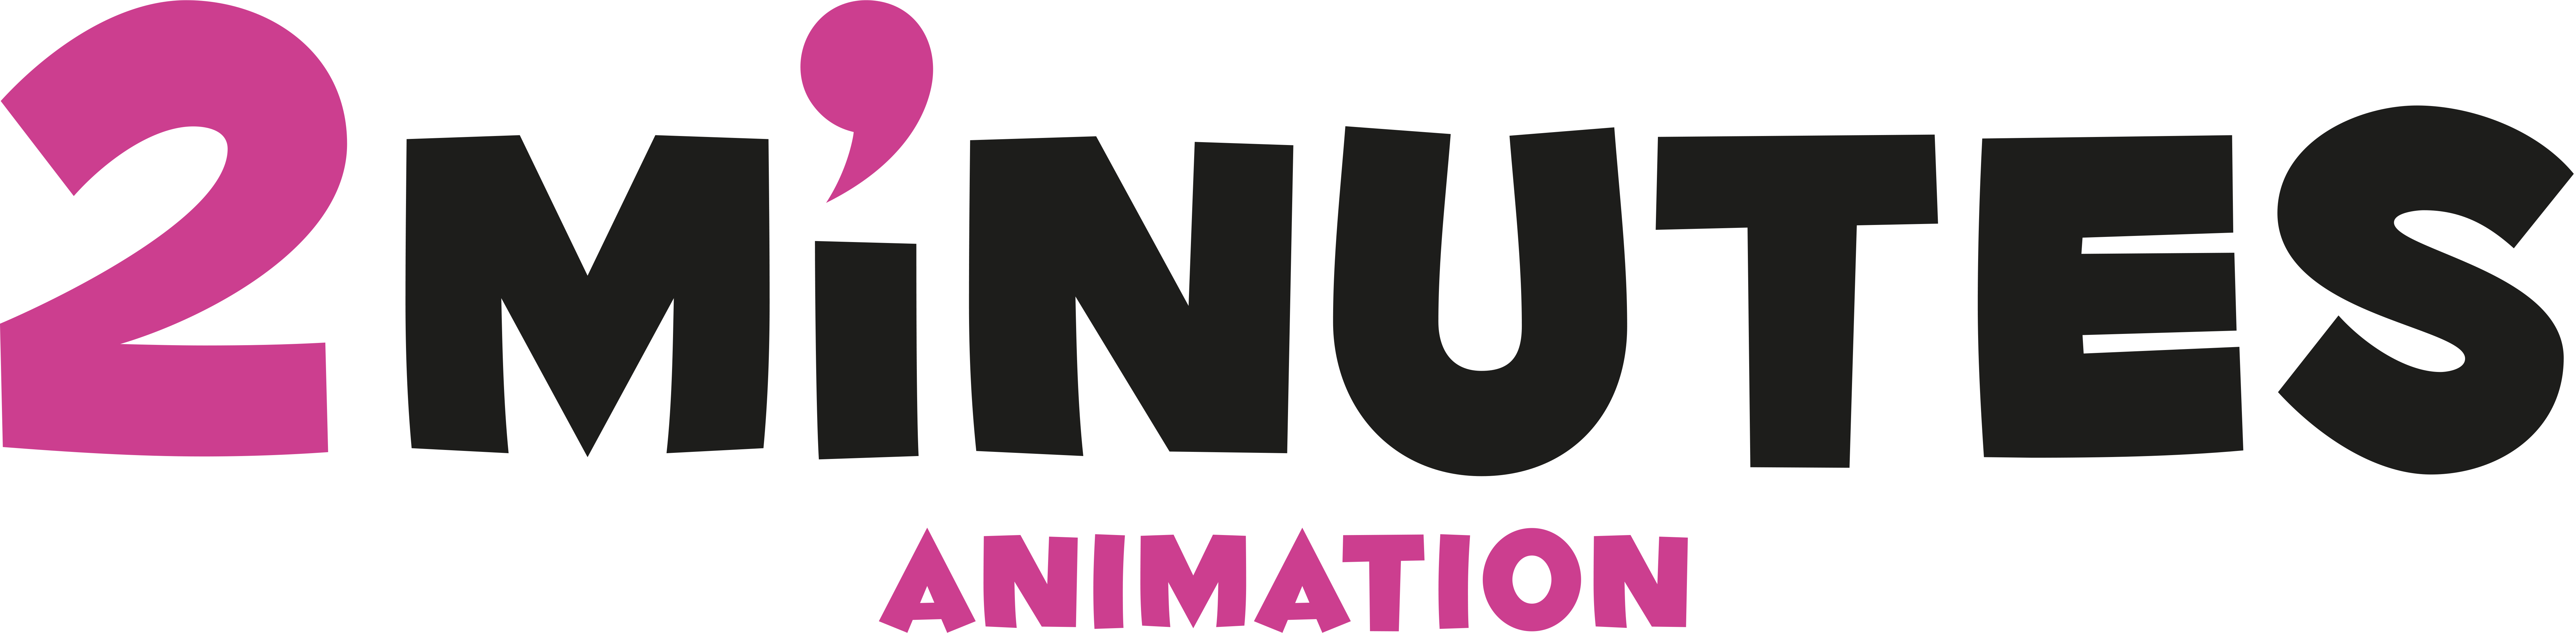 2 Minutes - The animation studios